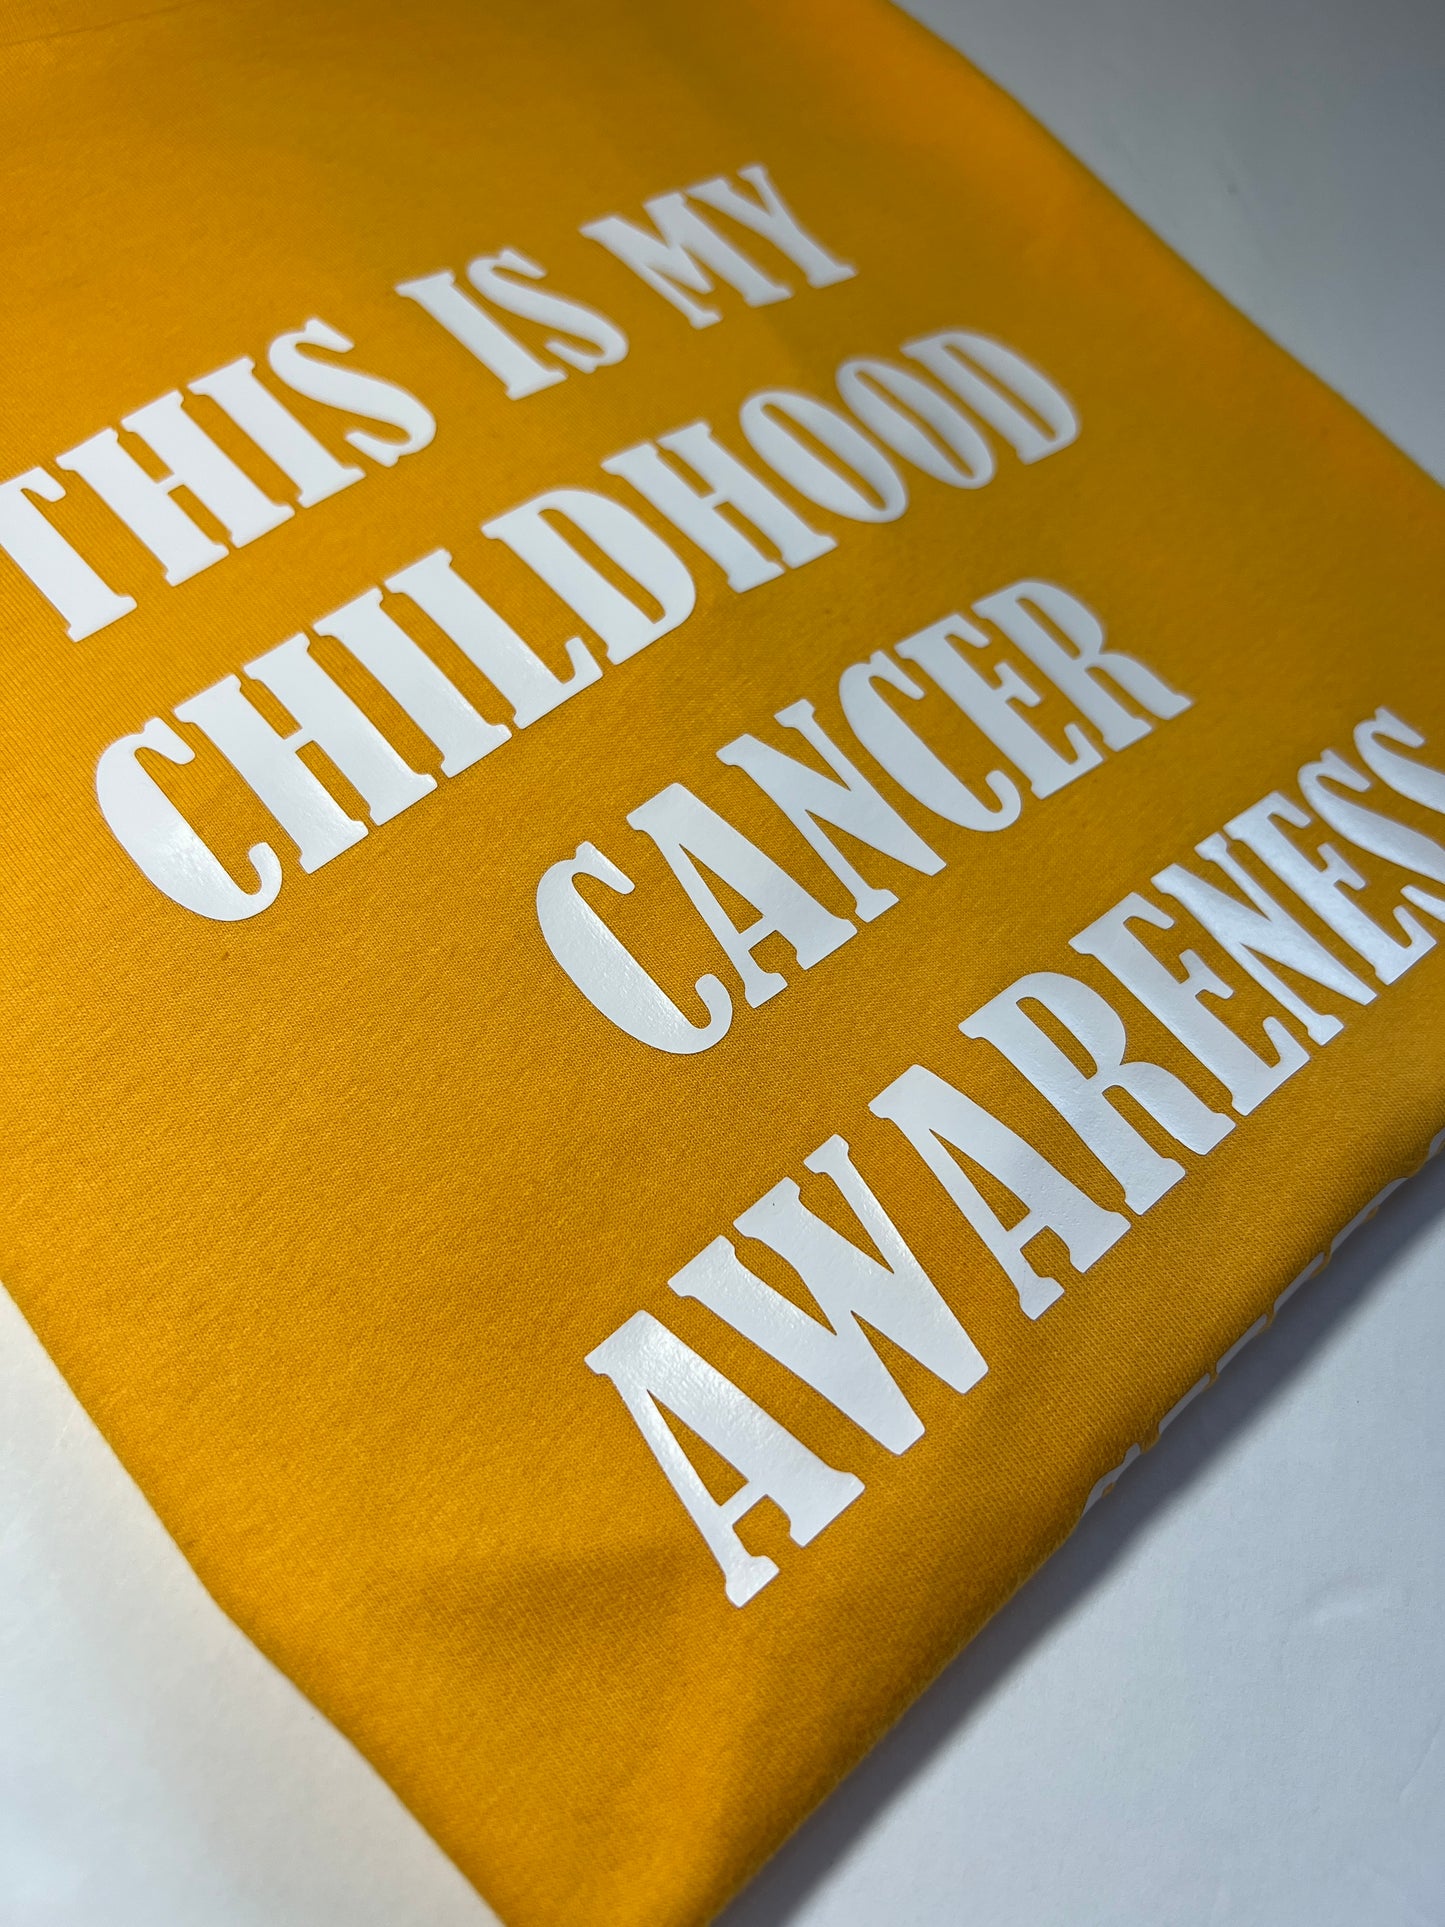 This is my Childhood Cancer Awareness Shirt - T-Shirt